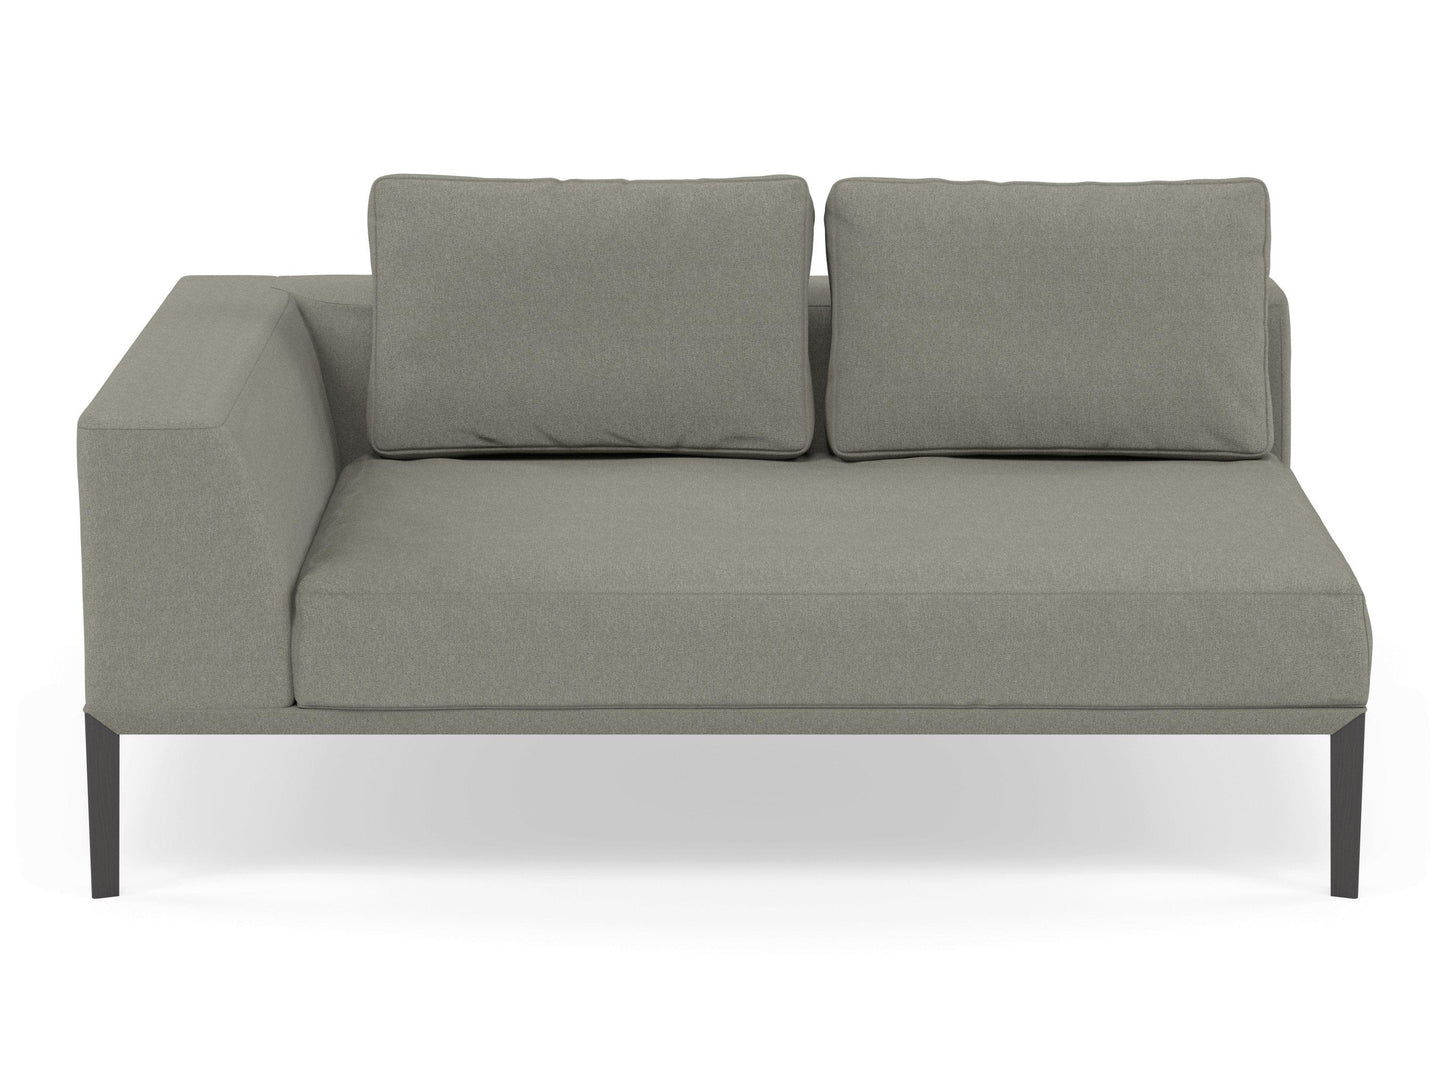 Modern 2 Seater Chaise Lounge Style Sofa with Right Armrest in Silver Grey Fabric-Wenge Oak-Distinct Designs (London) Ltd